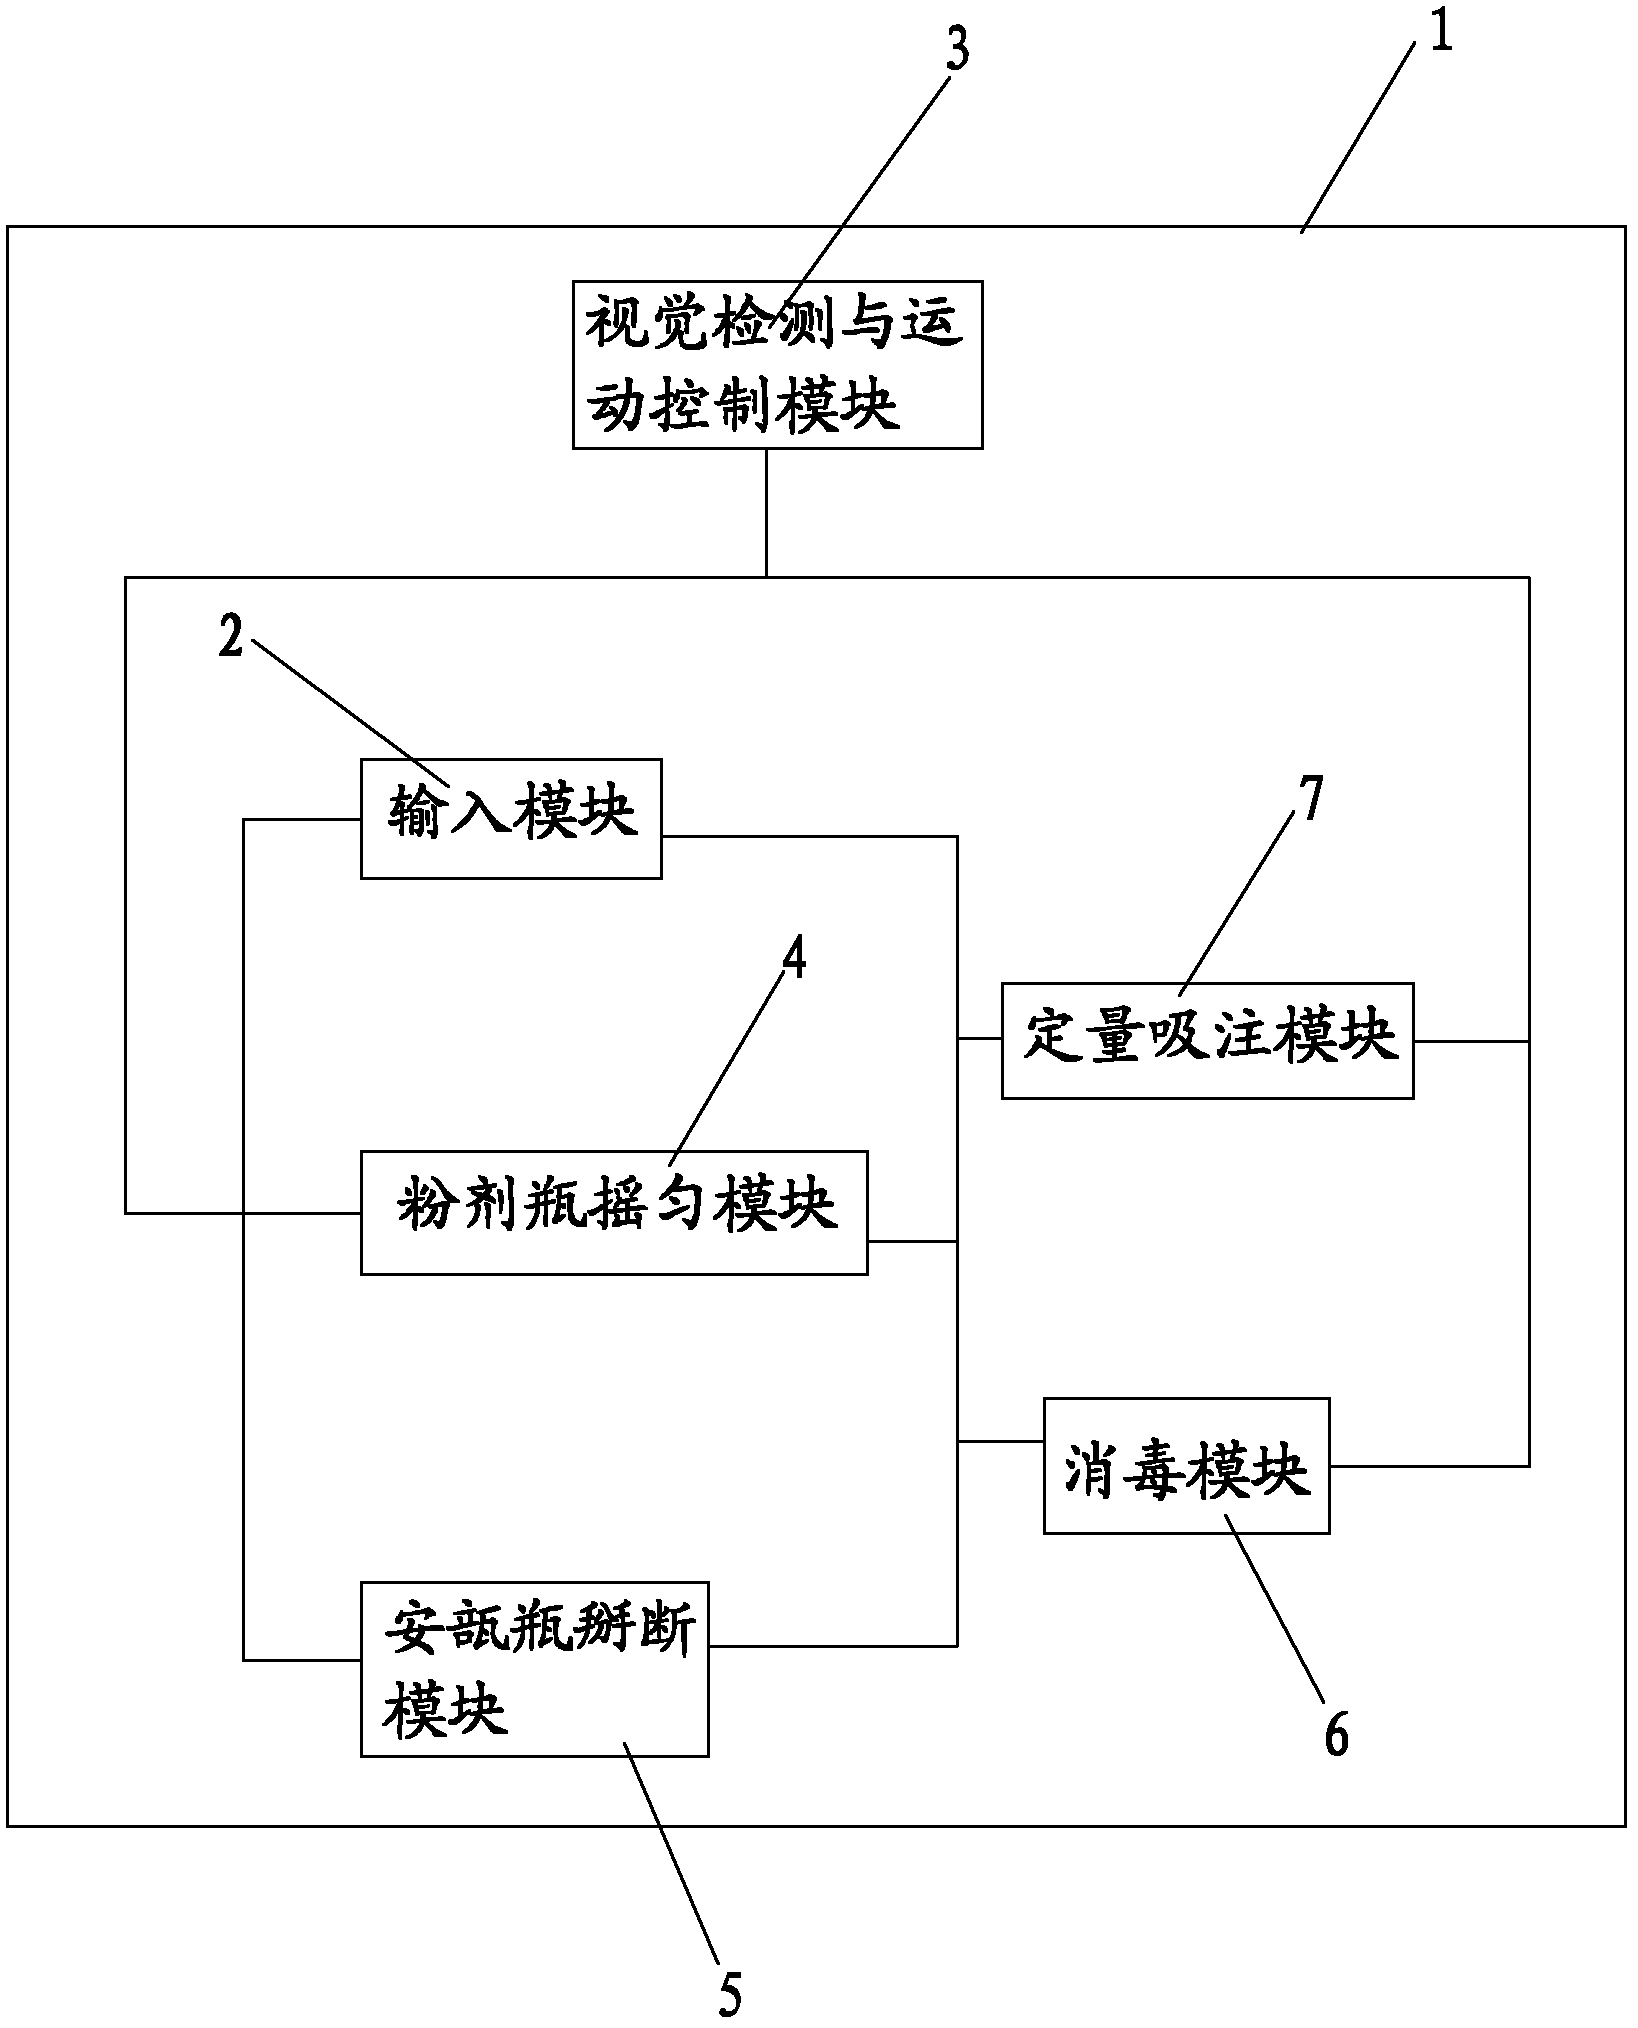 Automatic dispensing robot system and method